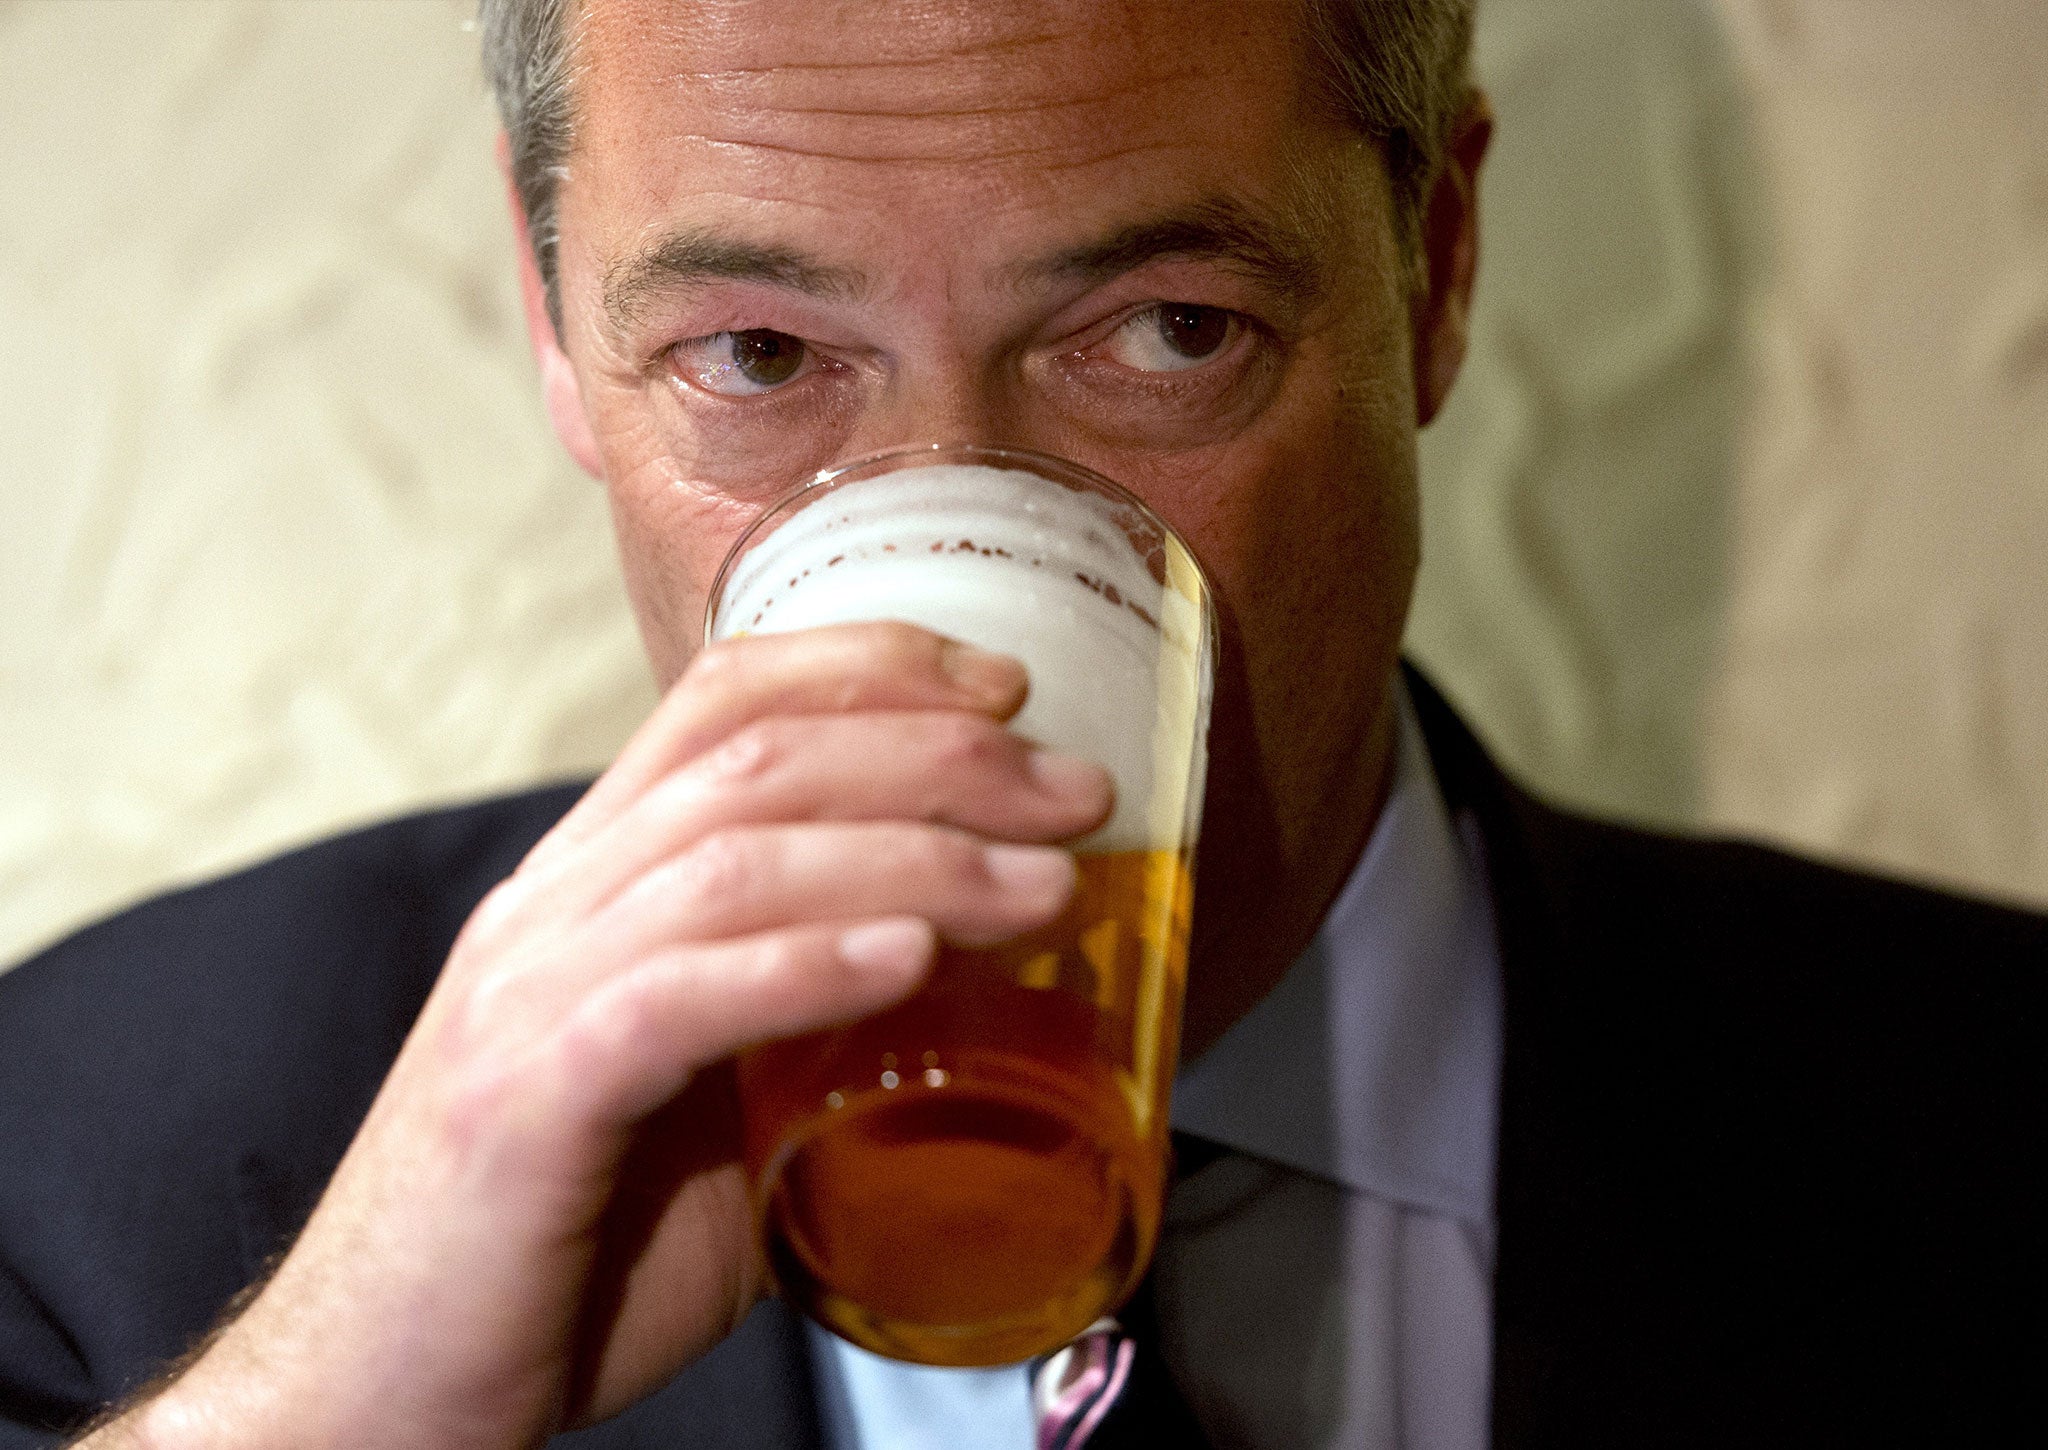 Nigel Farage enjoys a pint of beer after unveiling campaign posters ahead of the Heywood and Middleton by-election